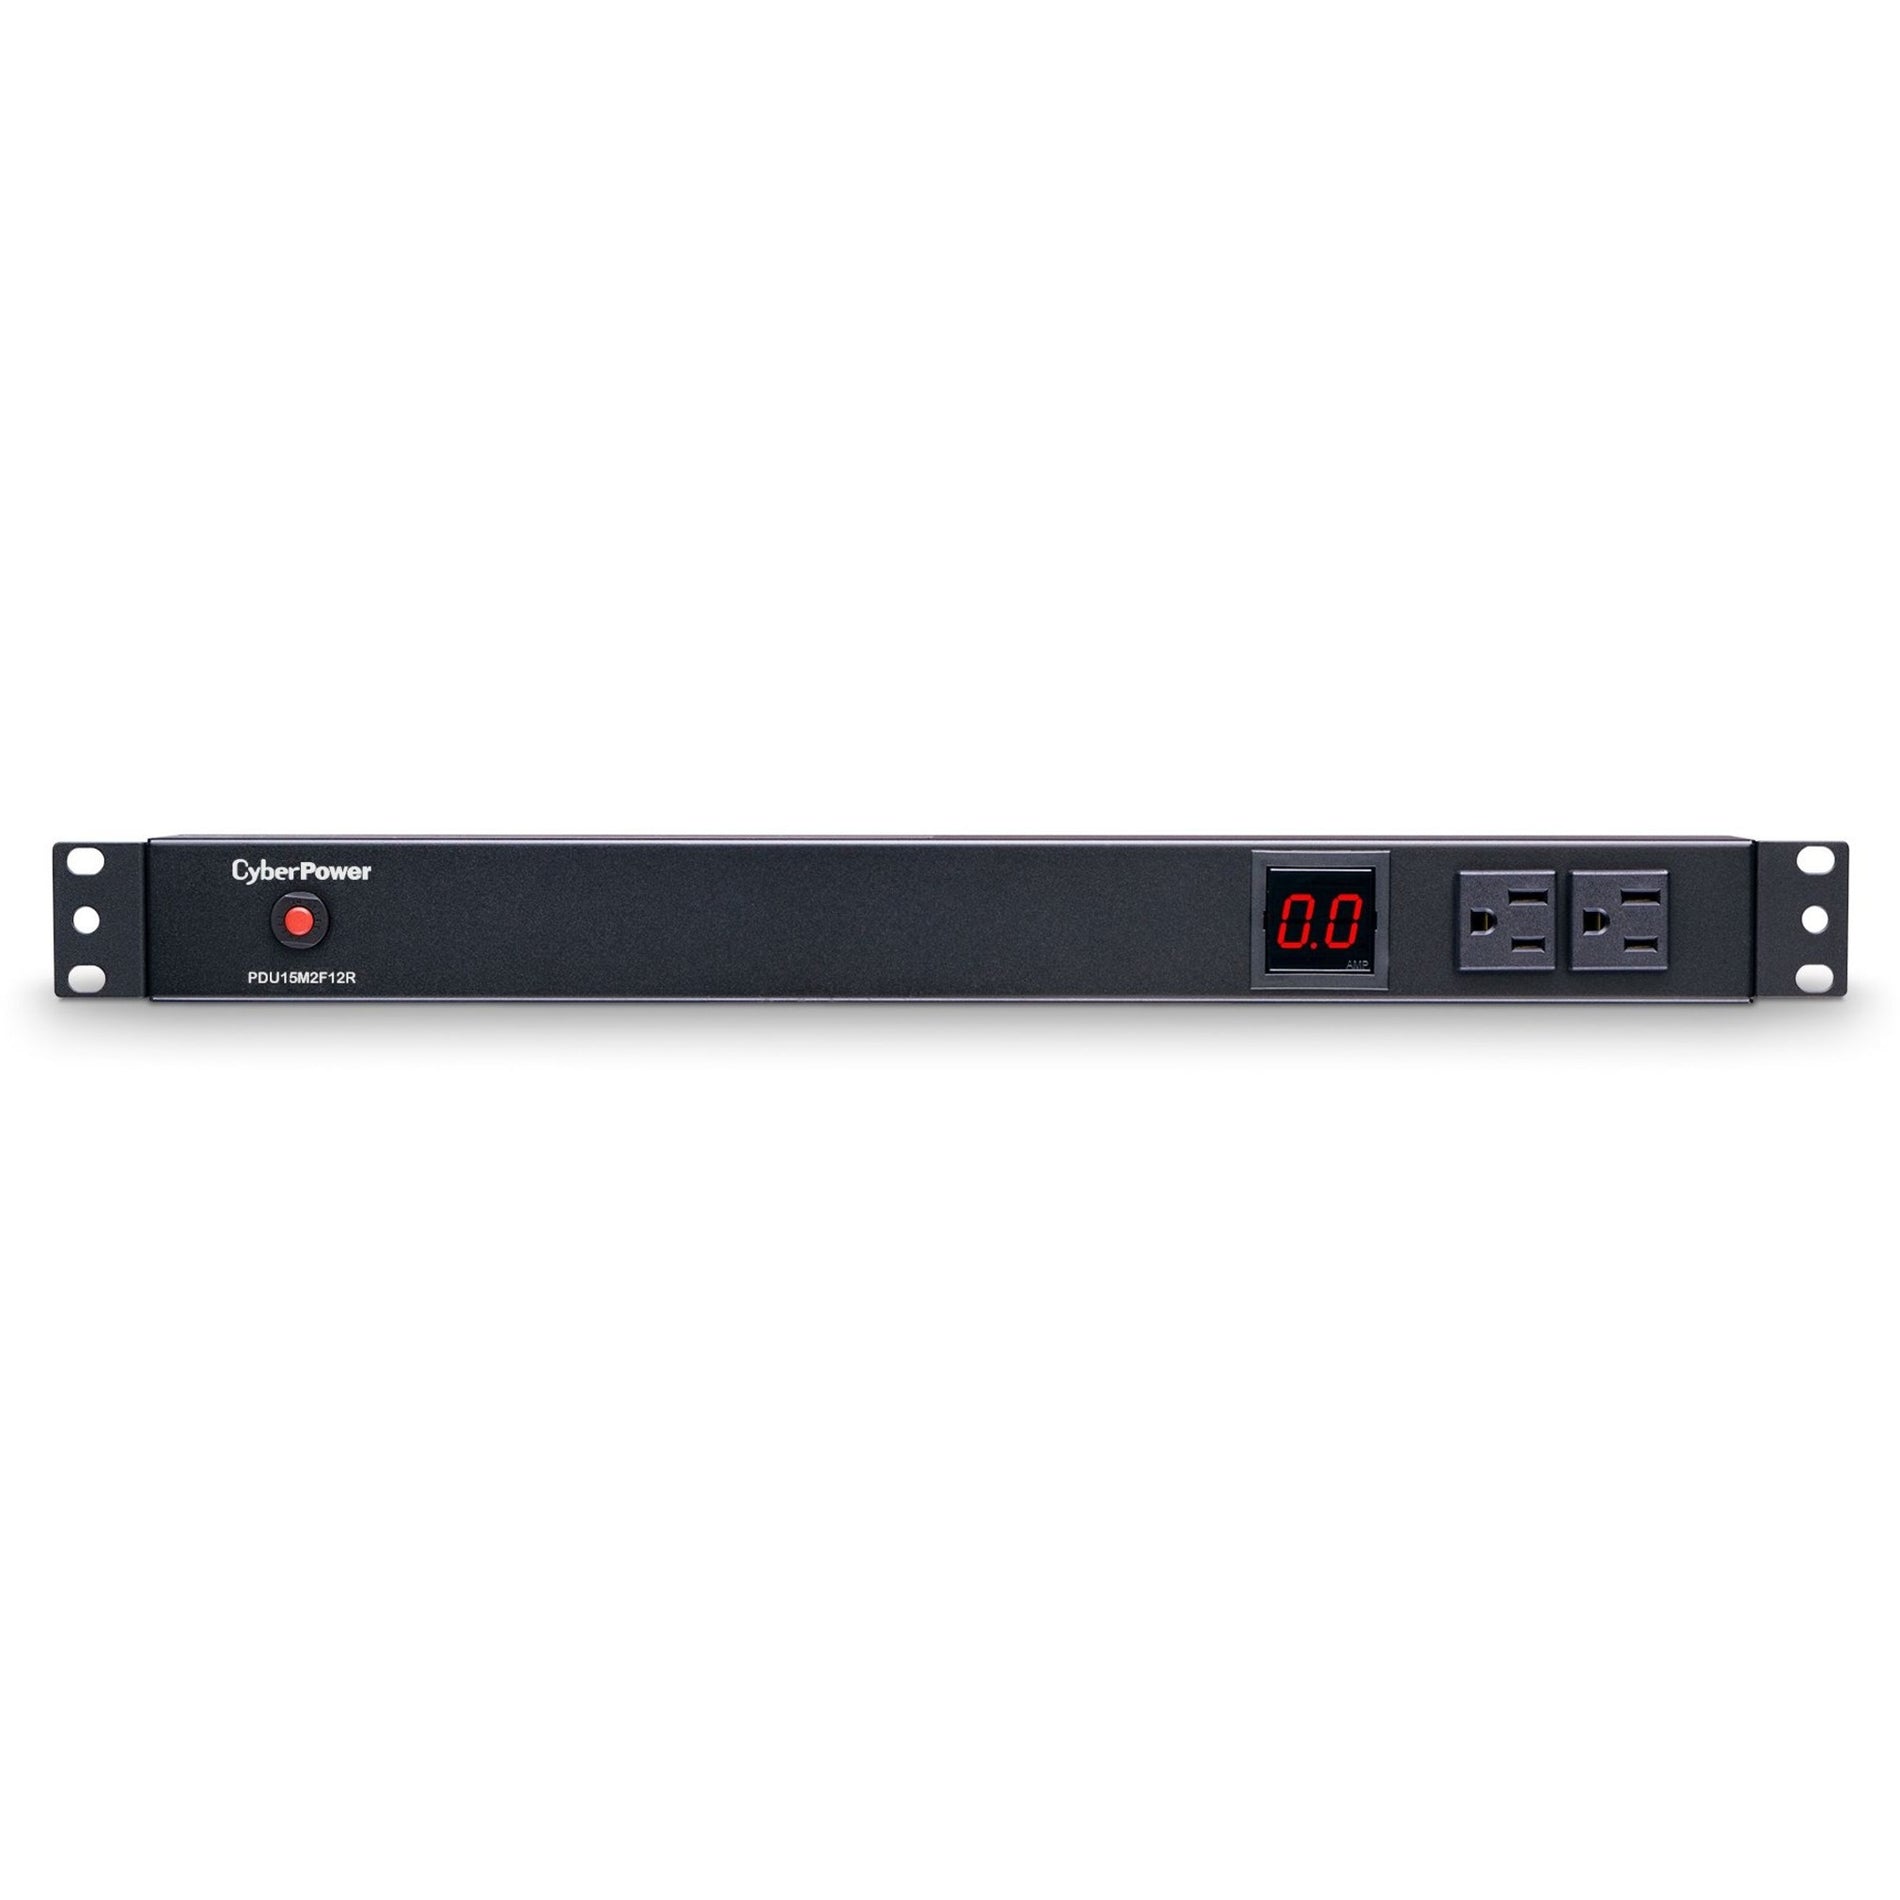 CyberPower PDU15M2F12R 14-Outlets PDU 100-125VAC 15A Metered Power Distribution Unit